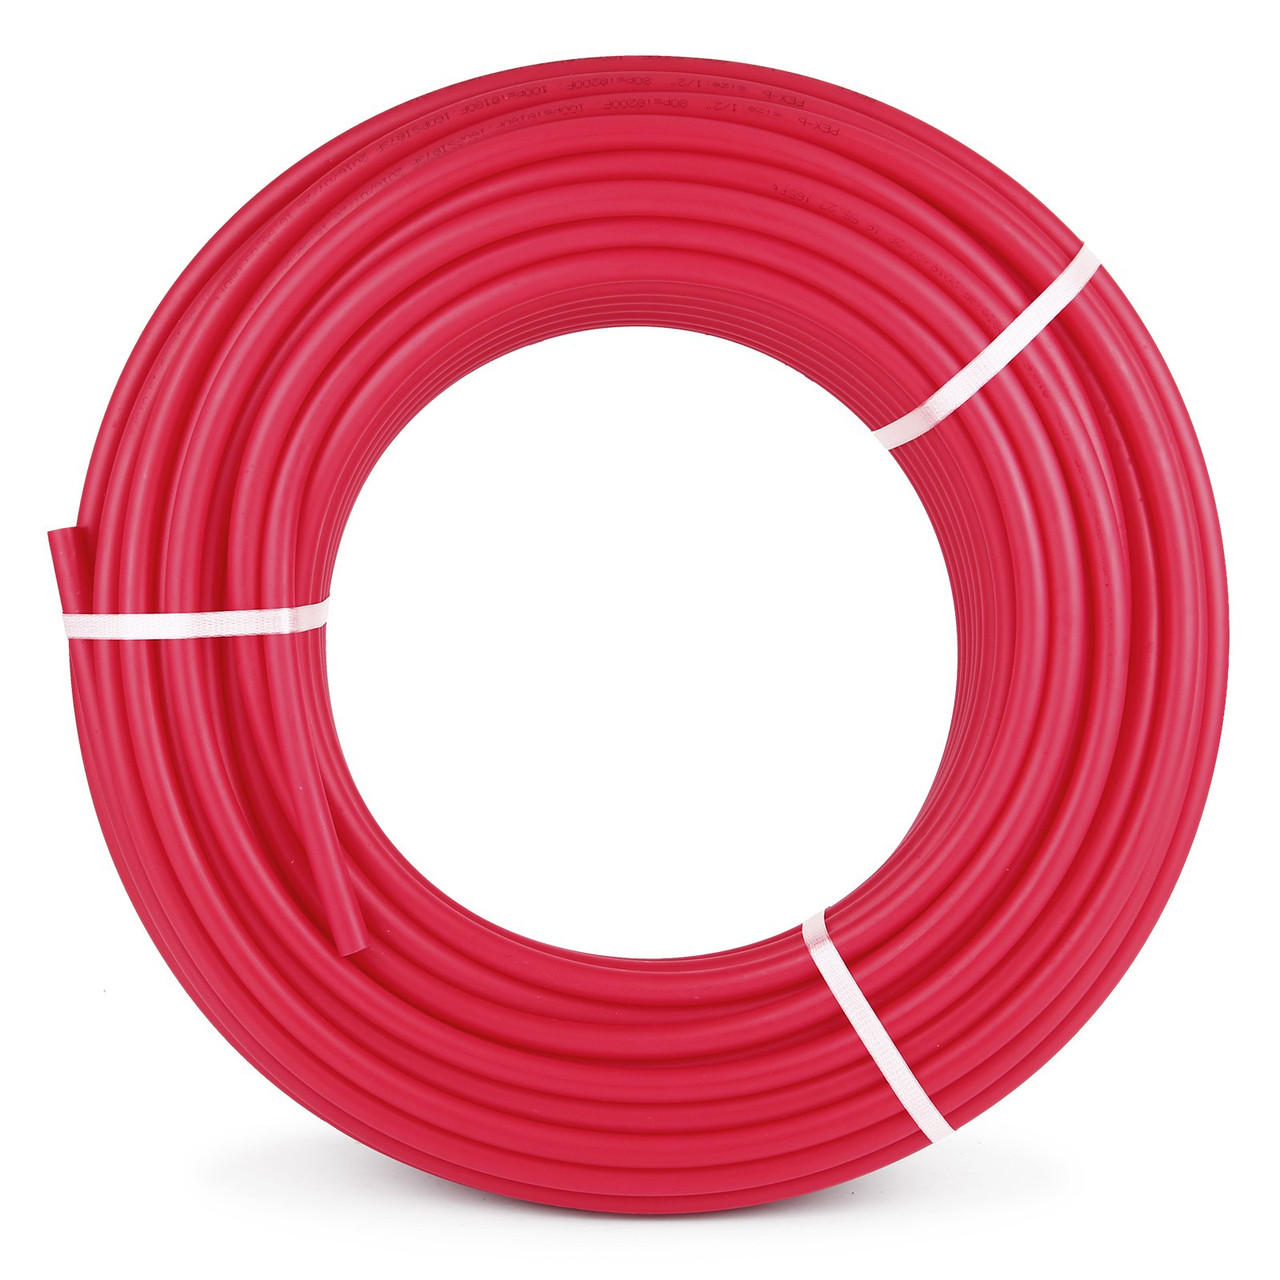 3/4" X 300Ft PEX Tubing Oxygen Barrier O2 EVOH Pex-B Red Hydronic Radiant Floor Heat Heating System Pex Pipe Pex Tube (3/4" O2-Barrier, 300Ft/Red)